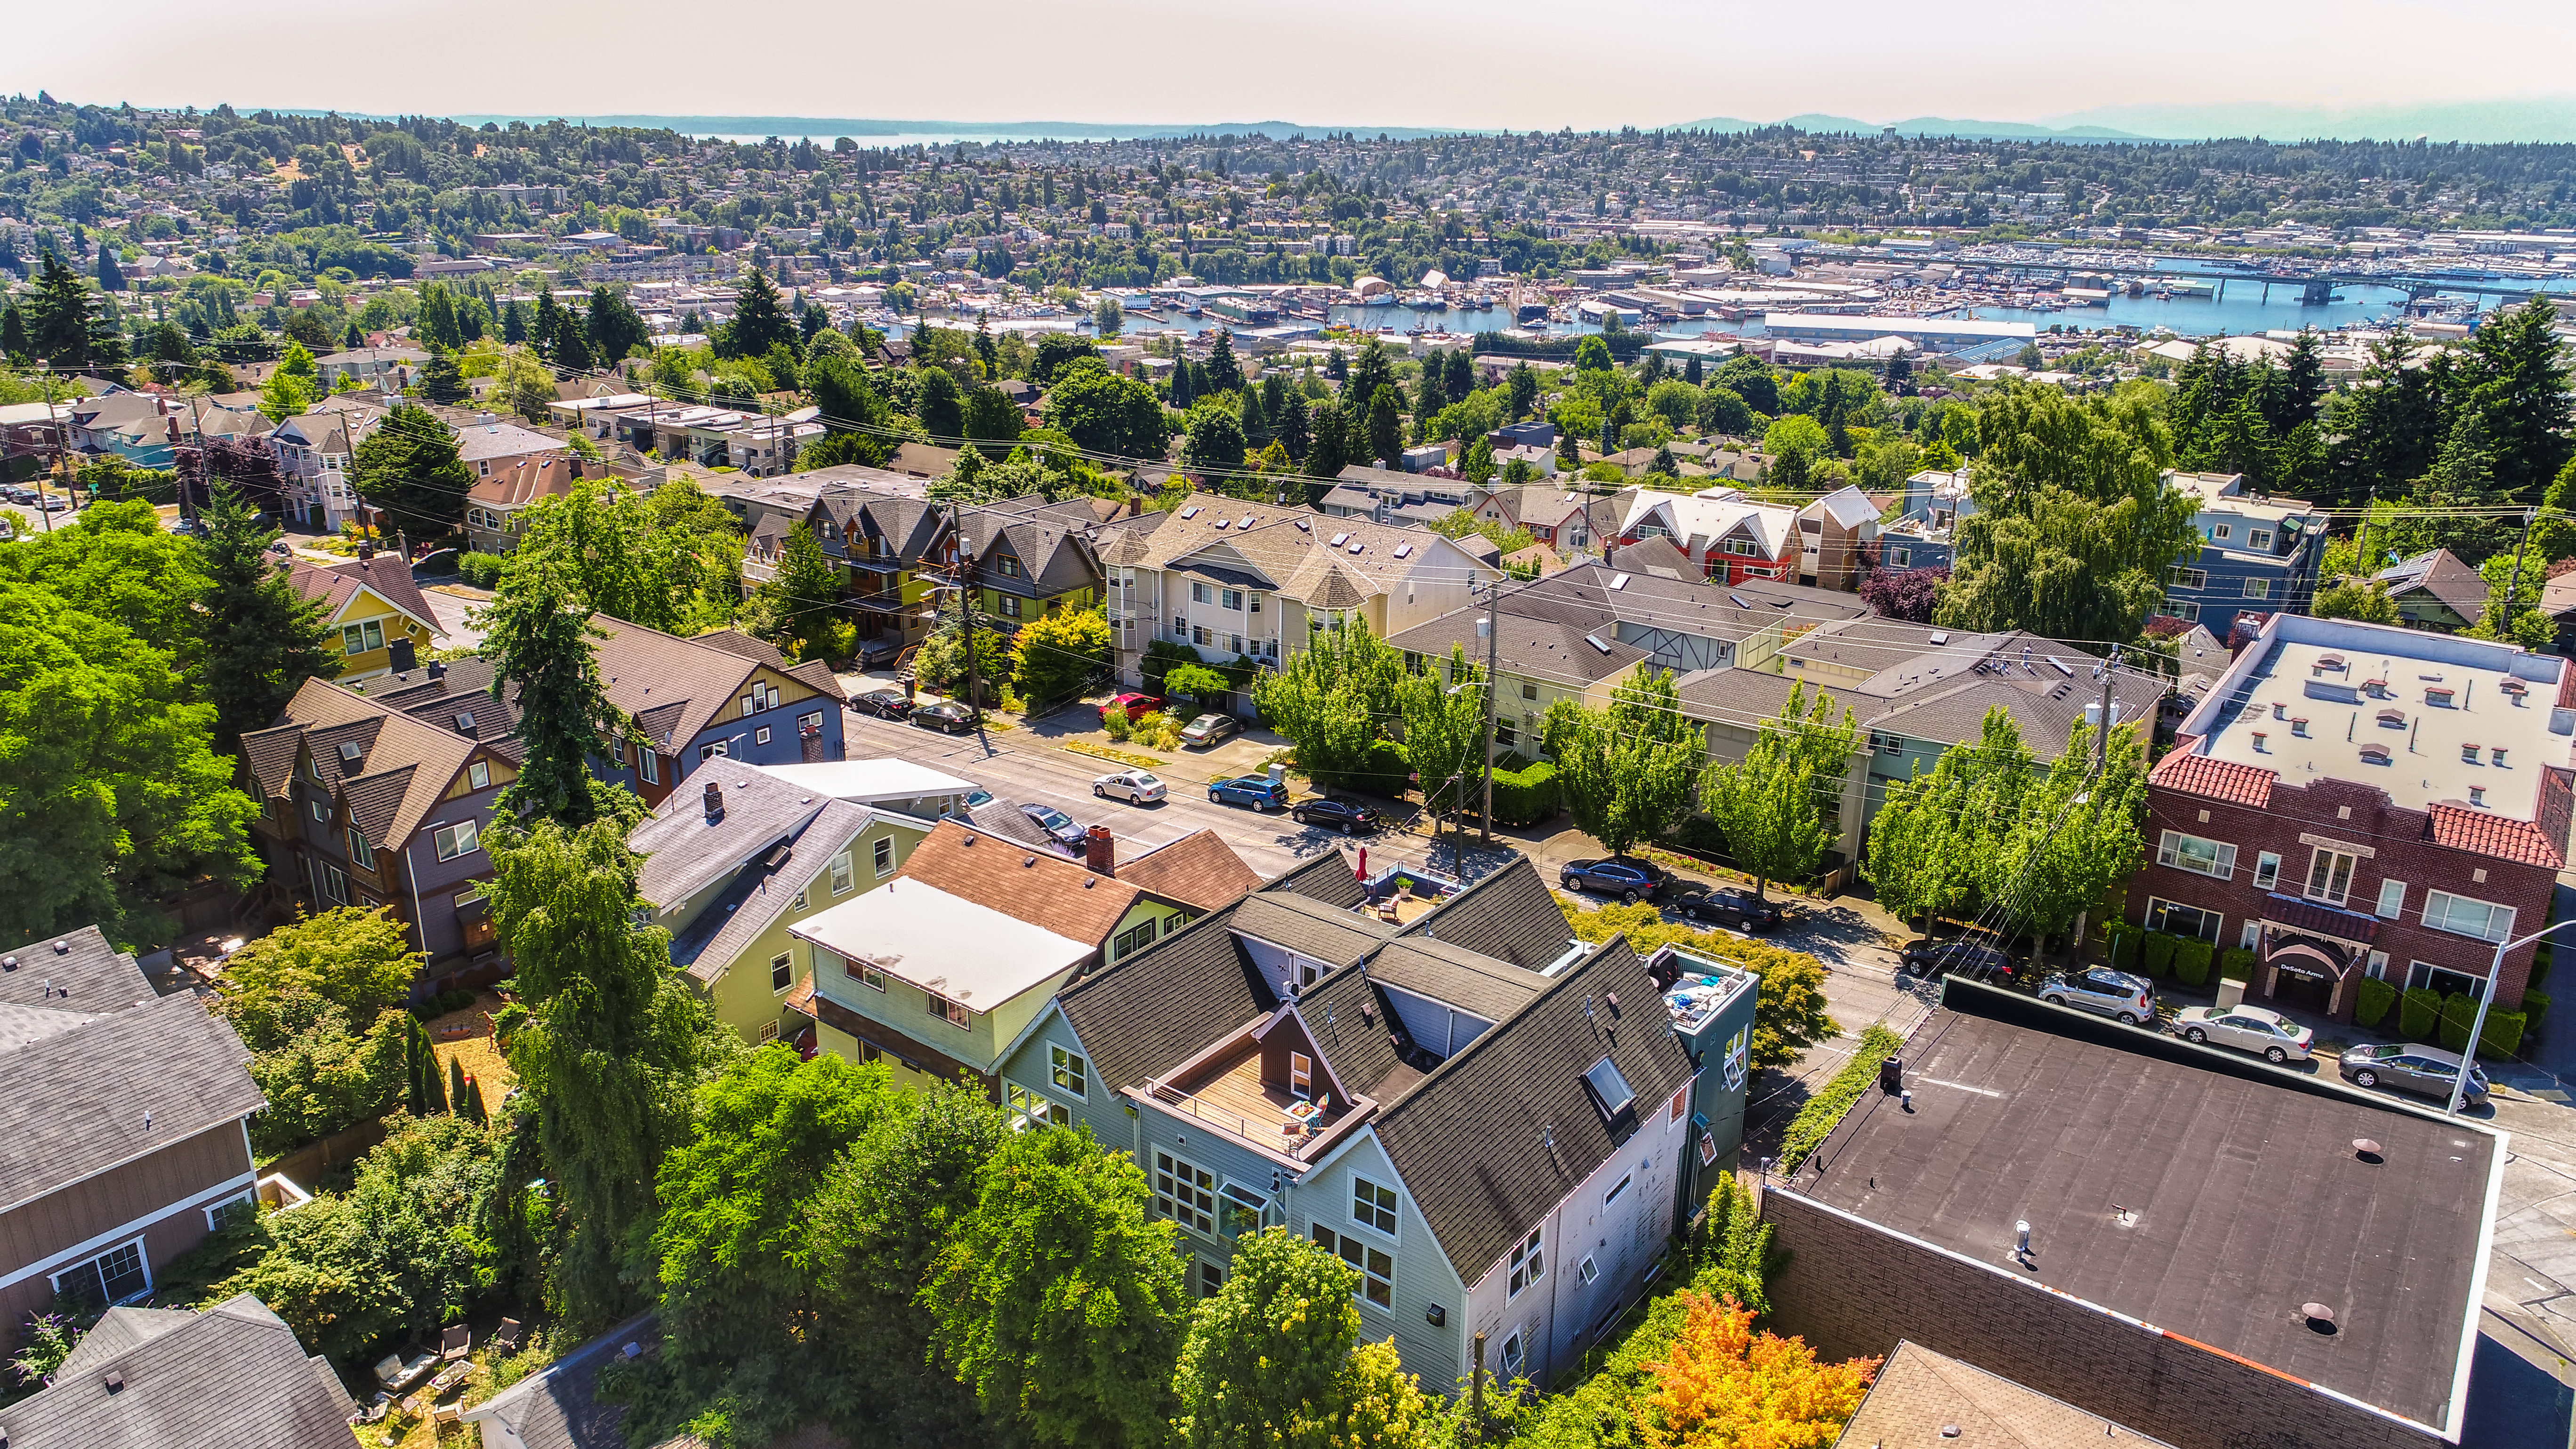 Property Photo: Aerials 4428 Phinney Ave N  WA 98103 